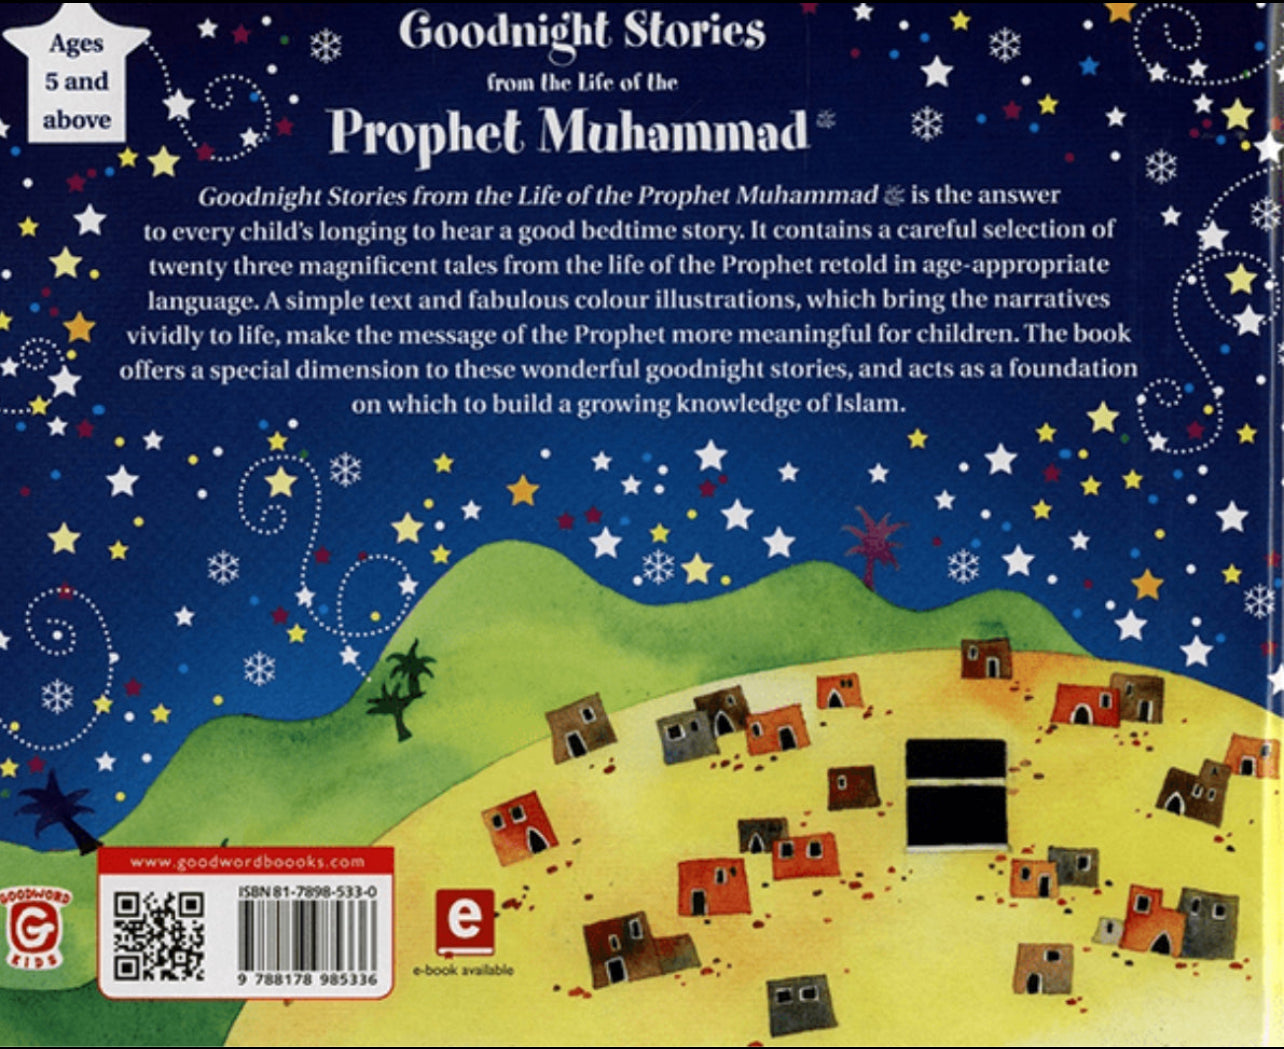 Goodnight Stories for Kids + BUNDLE DEAL